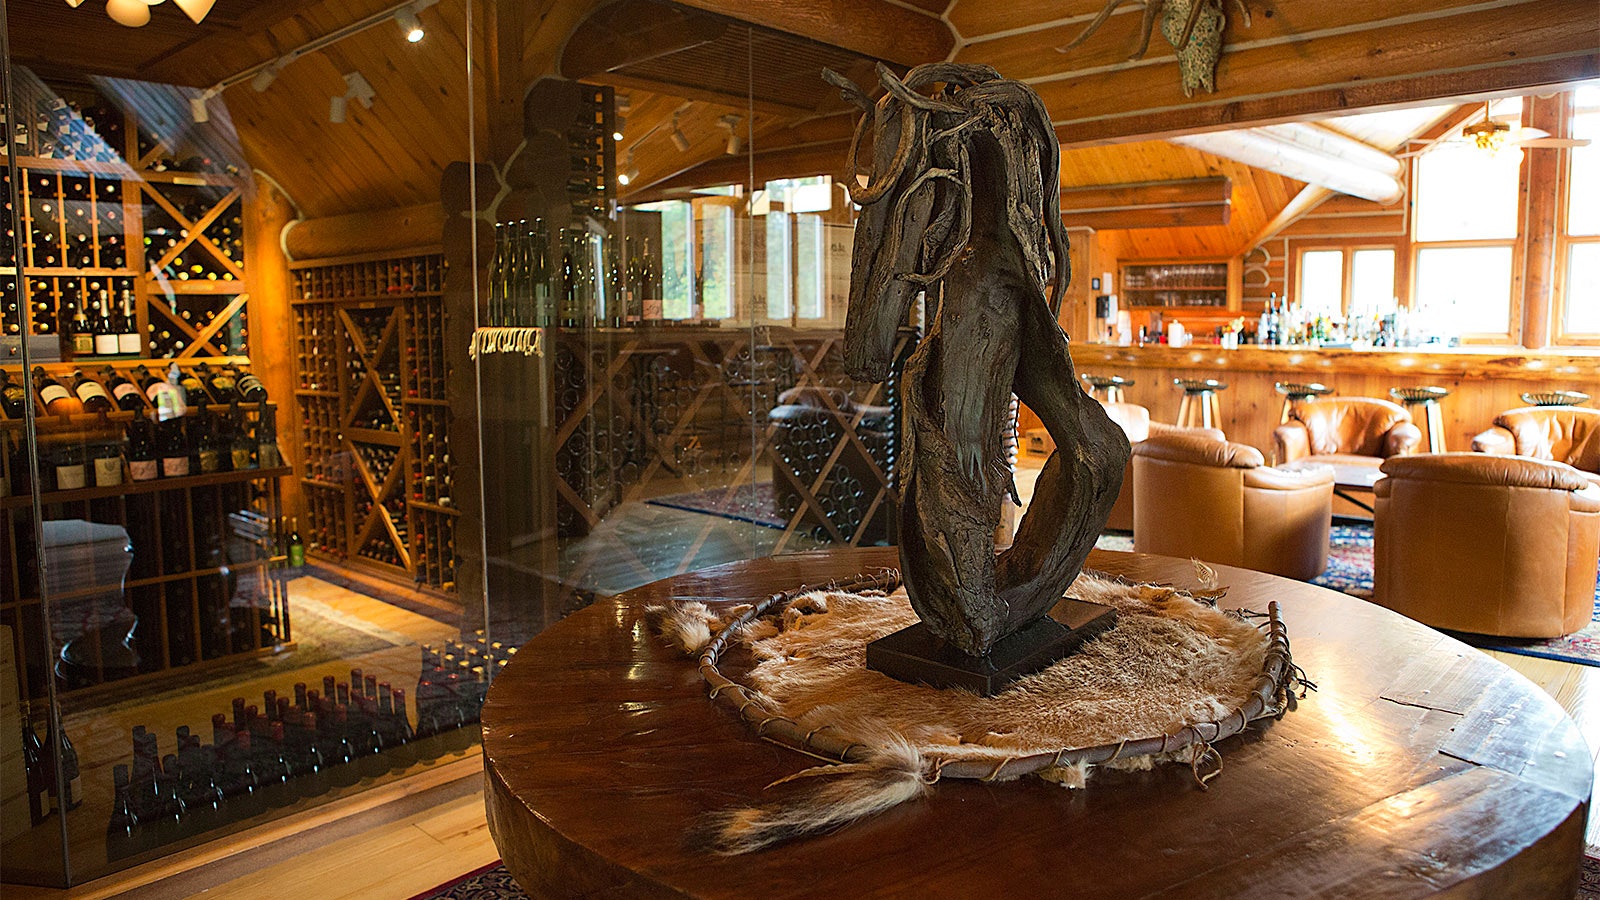  A glass-encased cellar of wine bottles at Triple Creek Ranch near leather seats, a bar and a rustic wood sculpture on a table